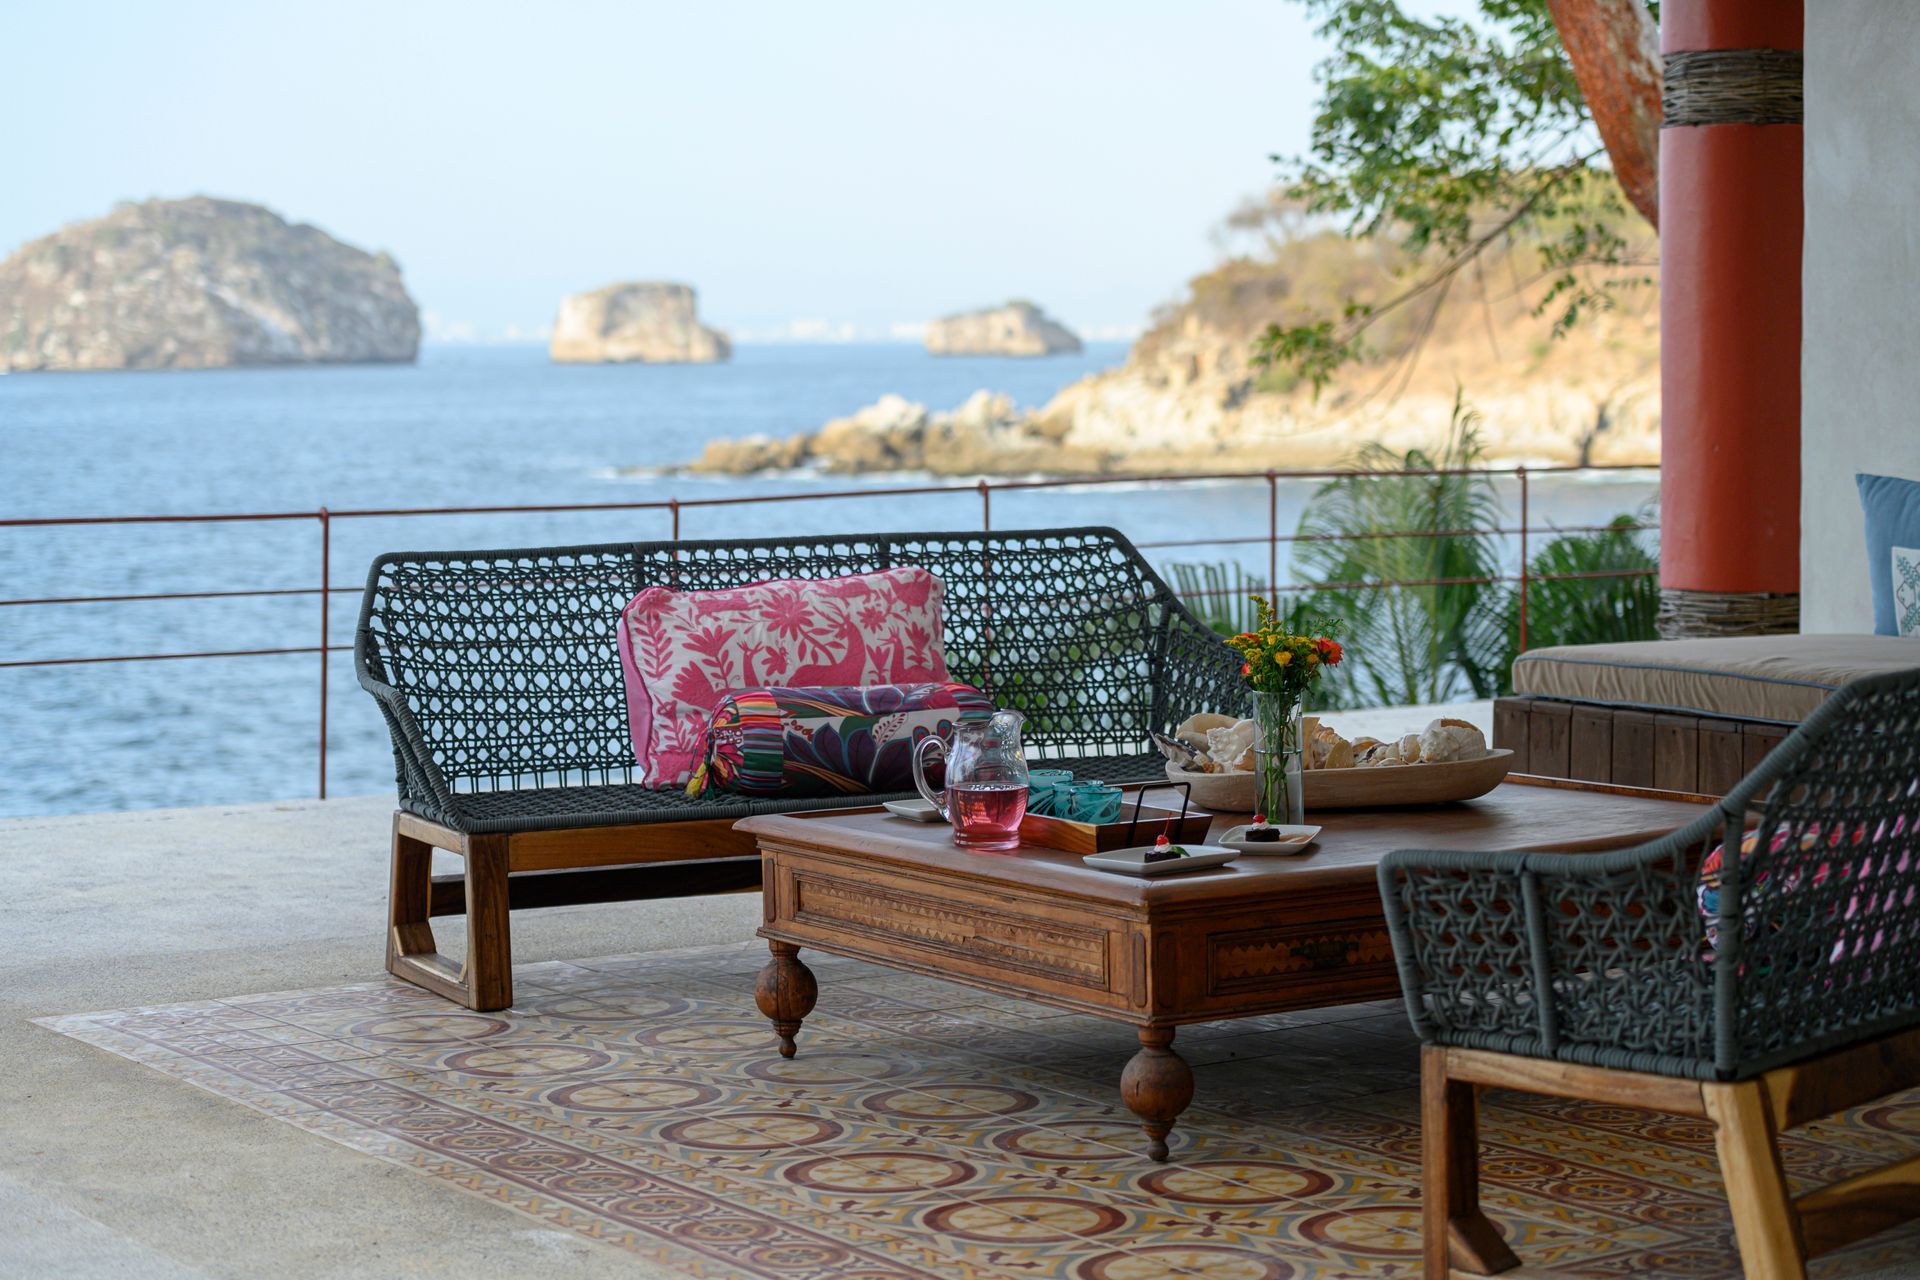 a couch and chairs are sitting on a patio overlooking the ocean